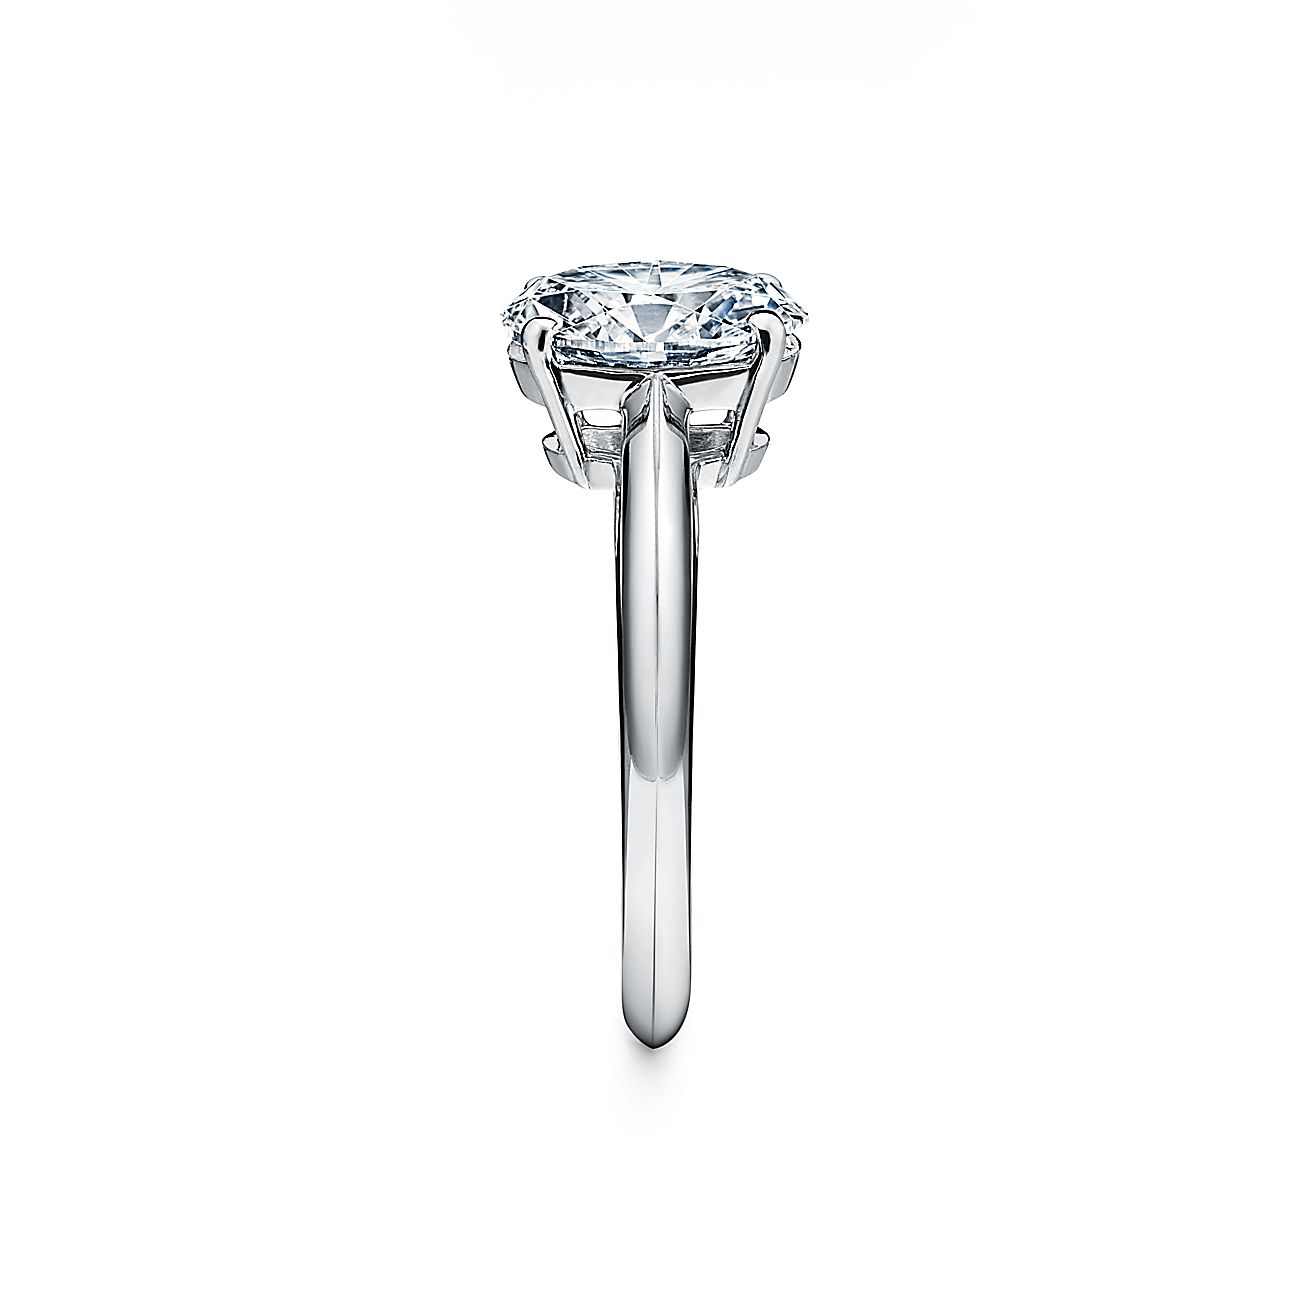 Oval-Cut Diamond Engagement Ring In Platinum. | Tiffany & Co.